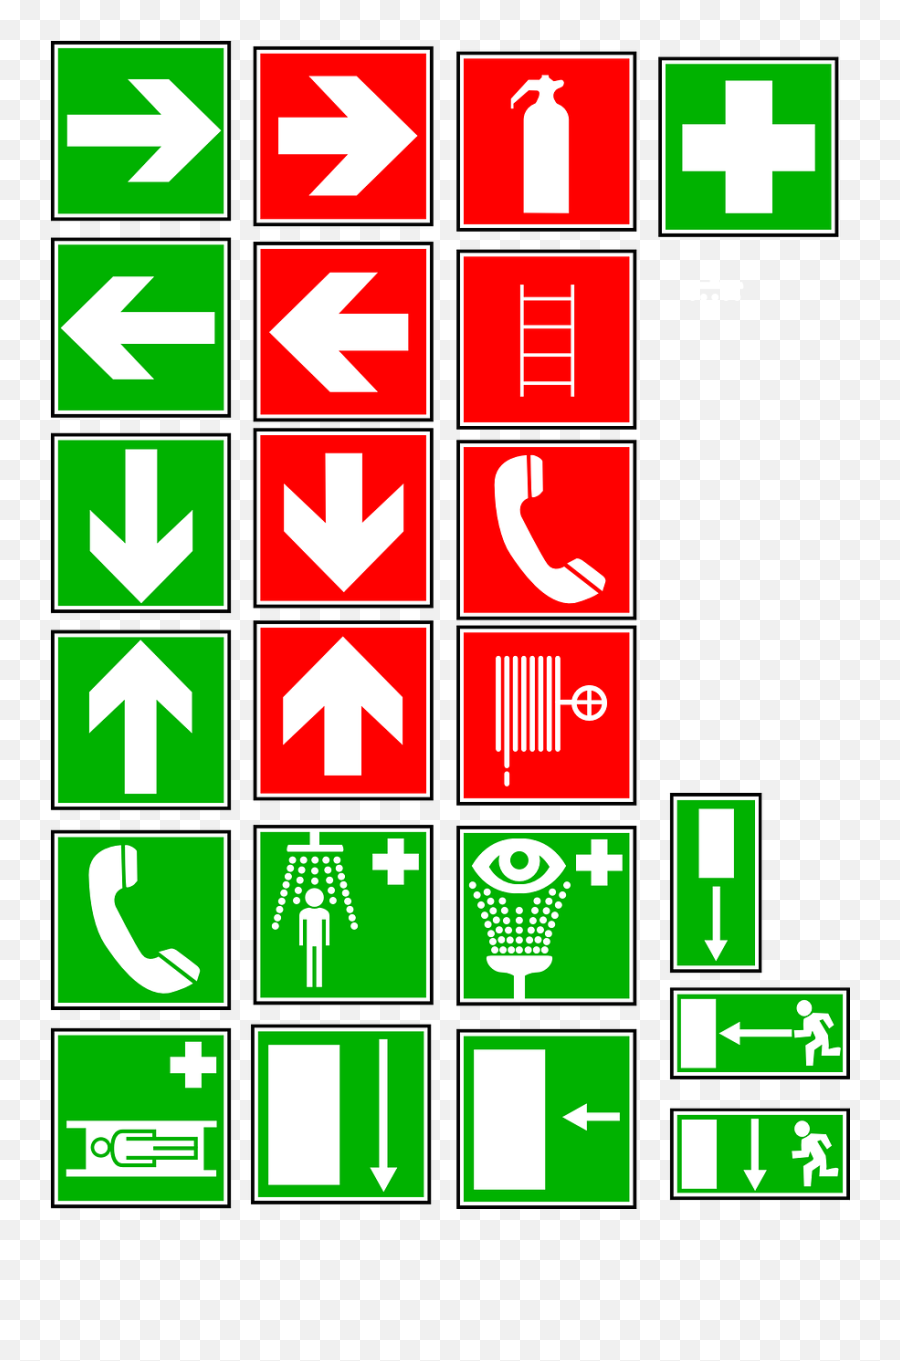 Signs Symbols Directions - Signs And Symbols For Directions Png,Directions Icon Png